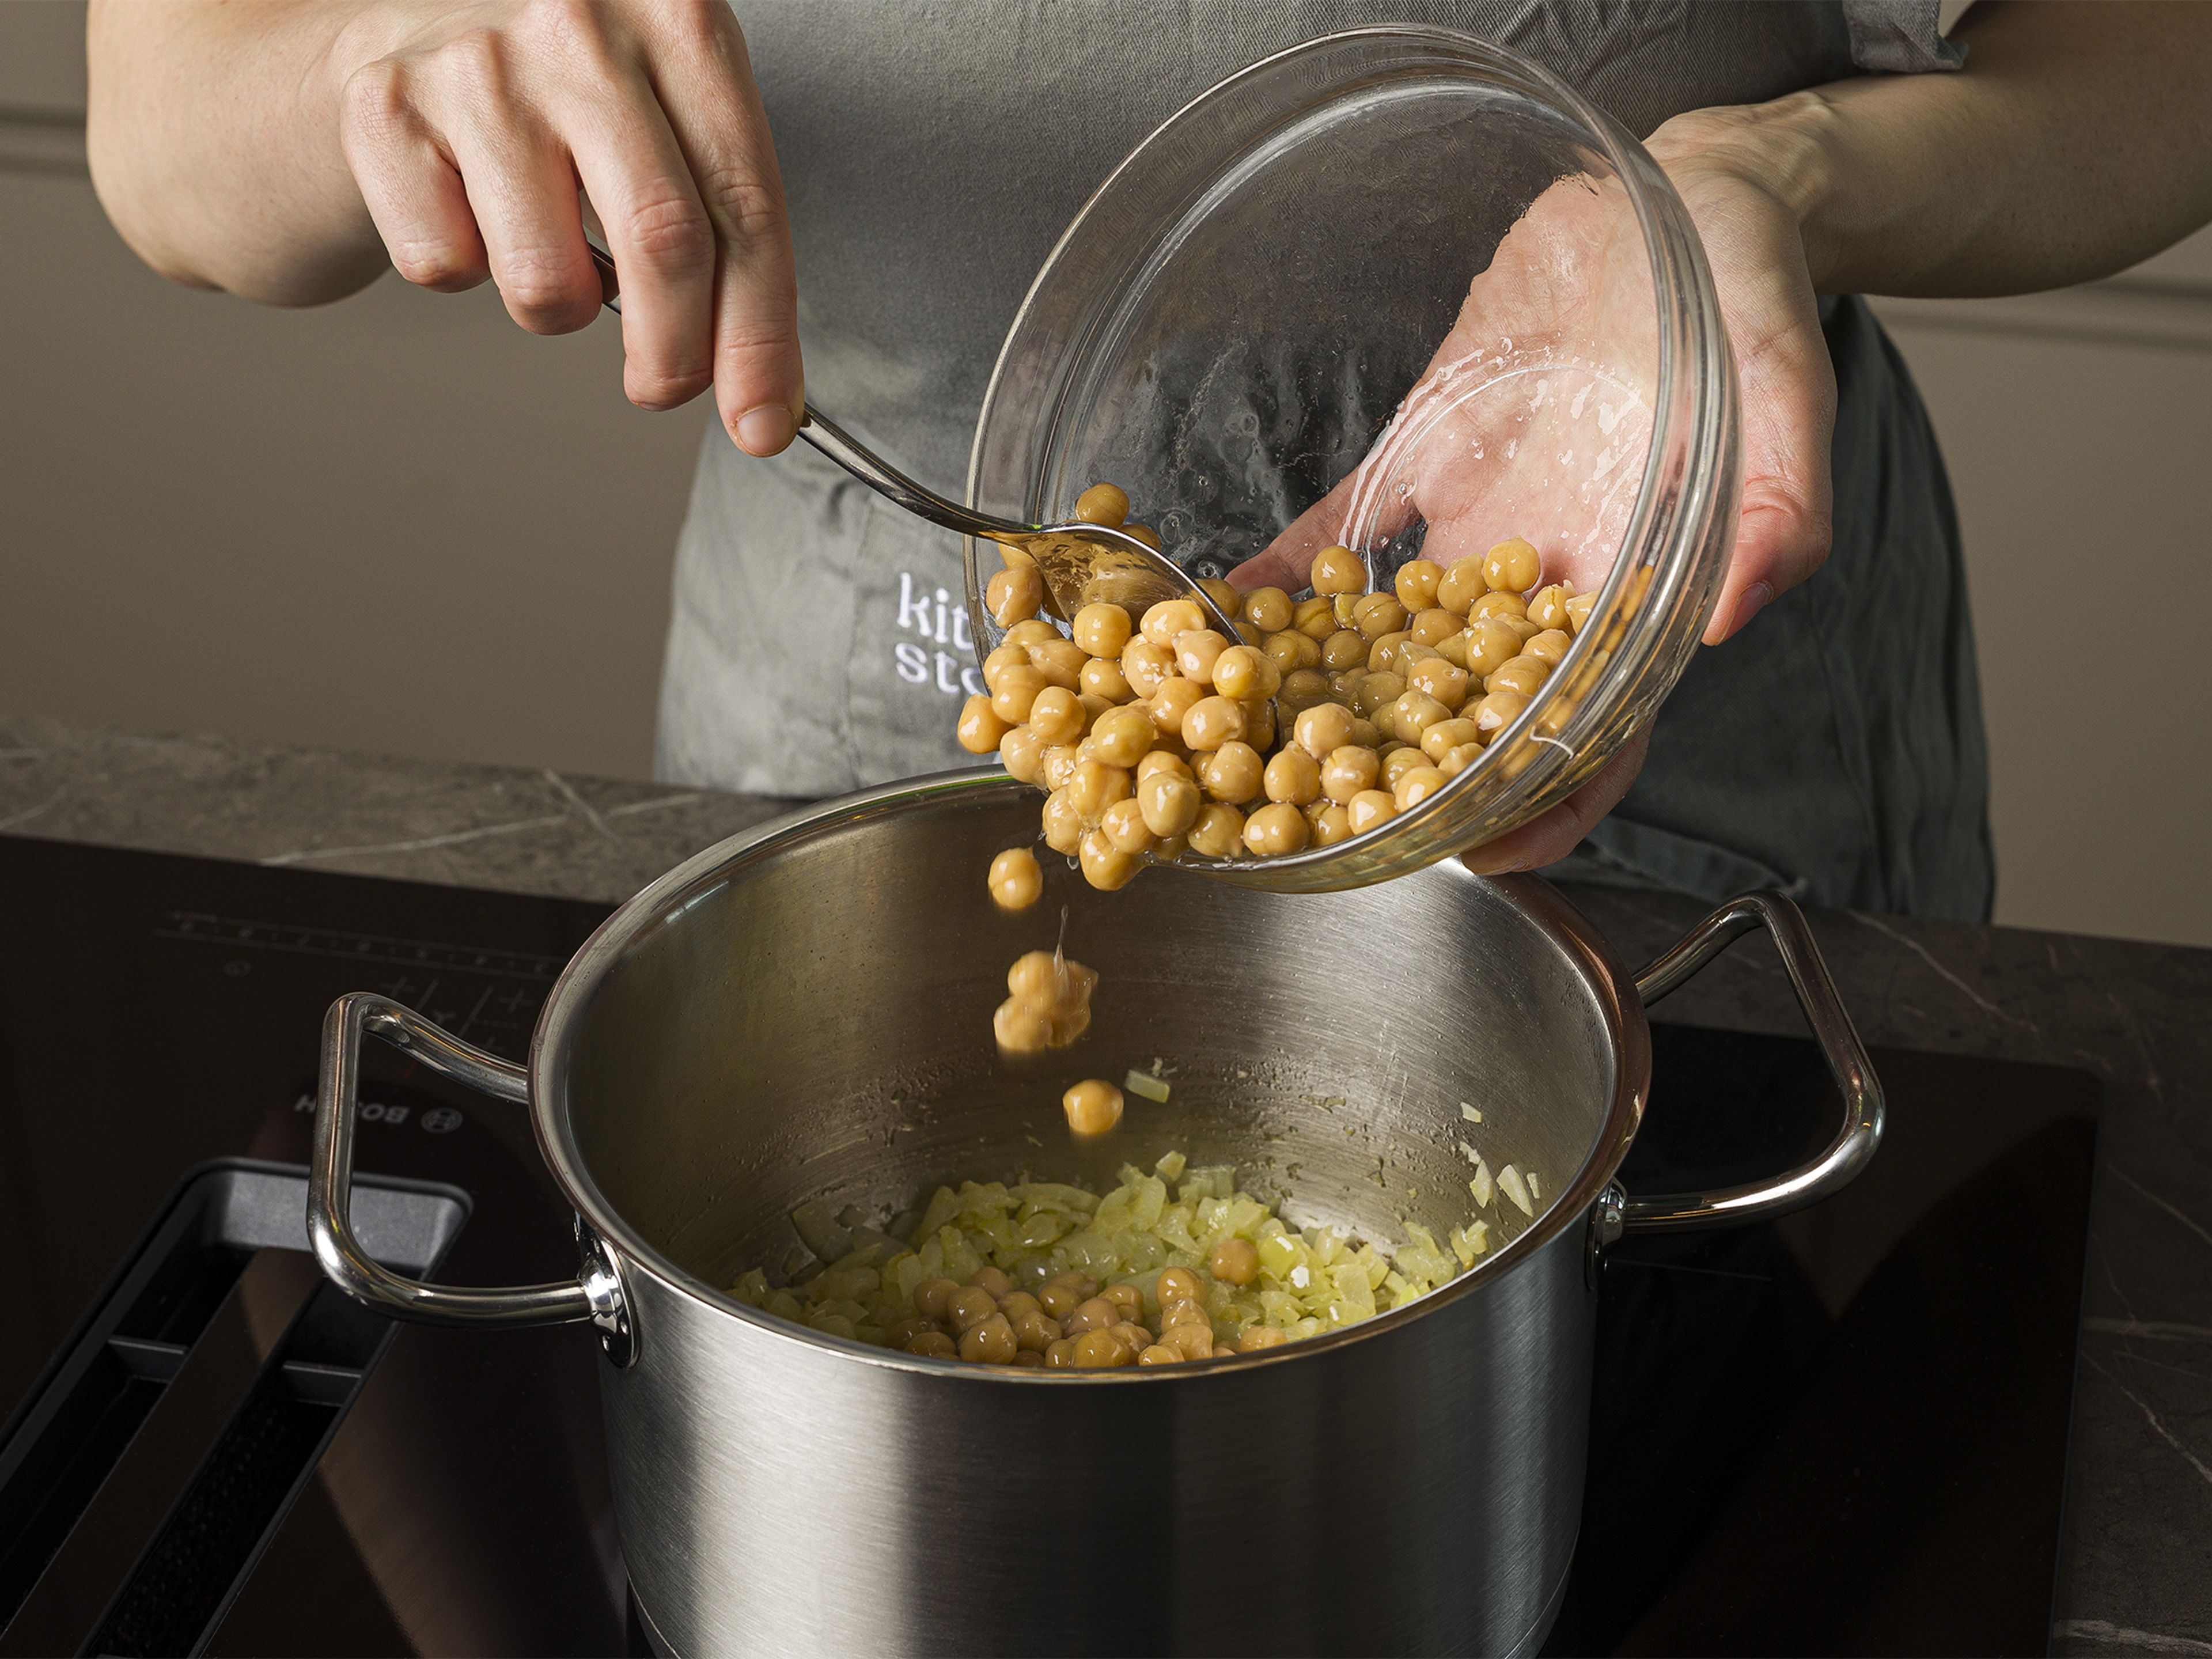 Heat olive oil in a pot over medium-high heat. Add onion and garlic, fry for approx. 2 min. Add chickpeas, vegetable broth, and half of the feta cheese, and cook for approx. 10 min. Season with salt and pepper.